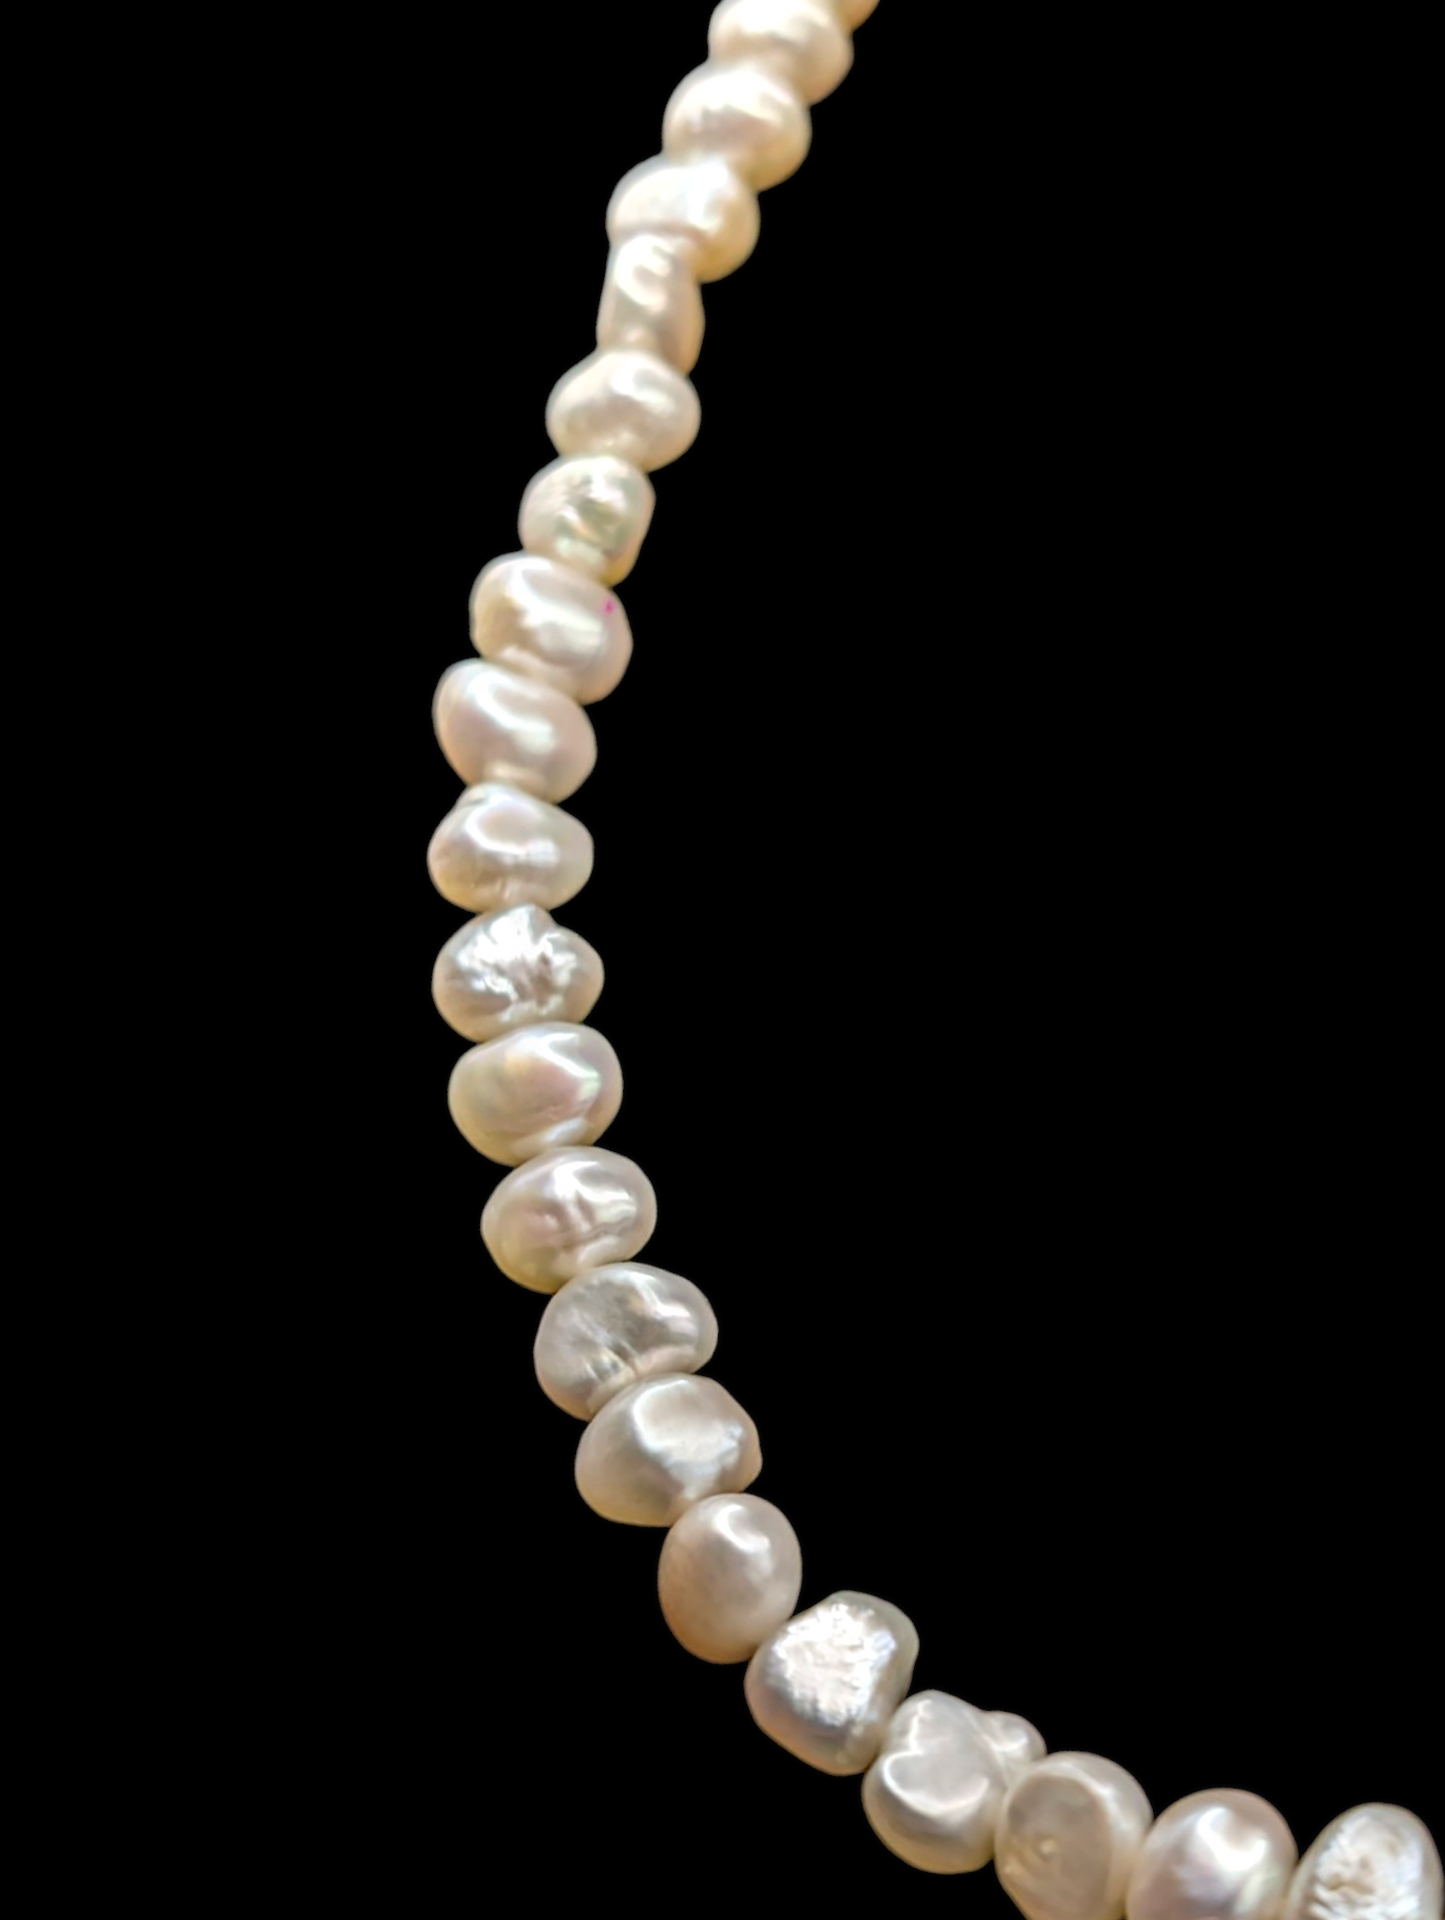 Vintage Sterling Silver Genuine Baroque Freshwater 7mm Pearl Necklace